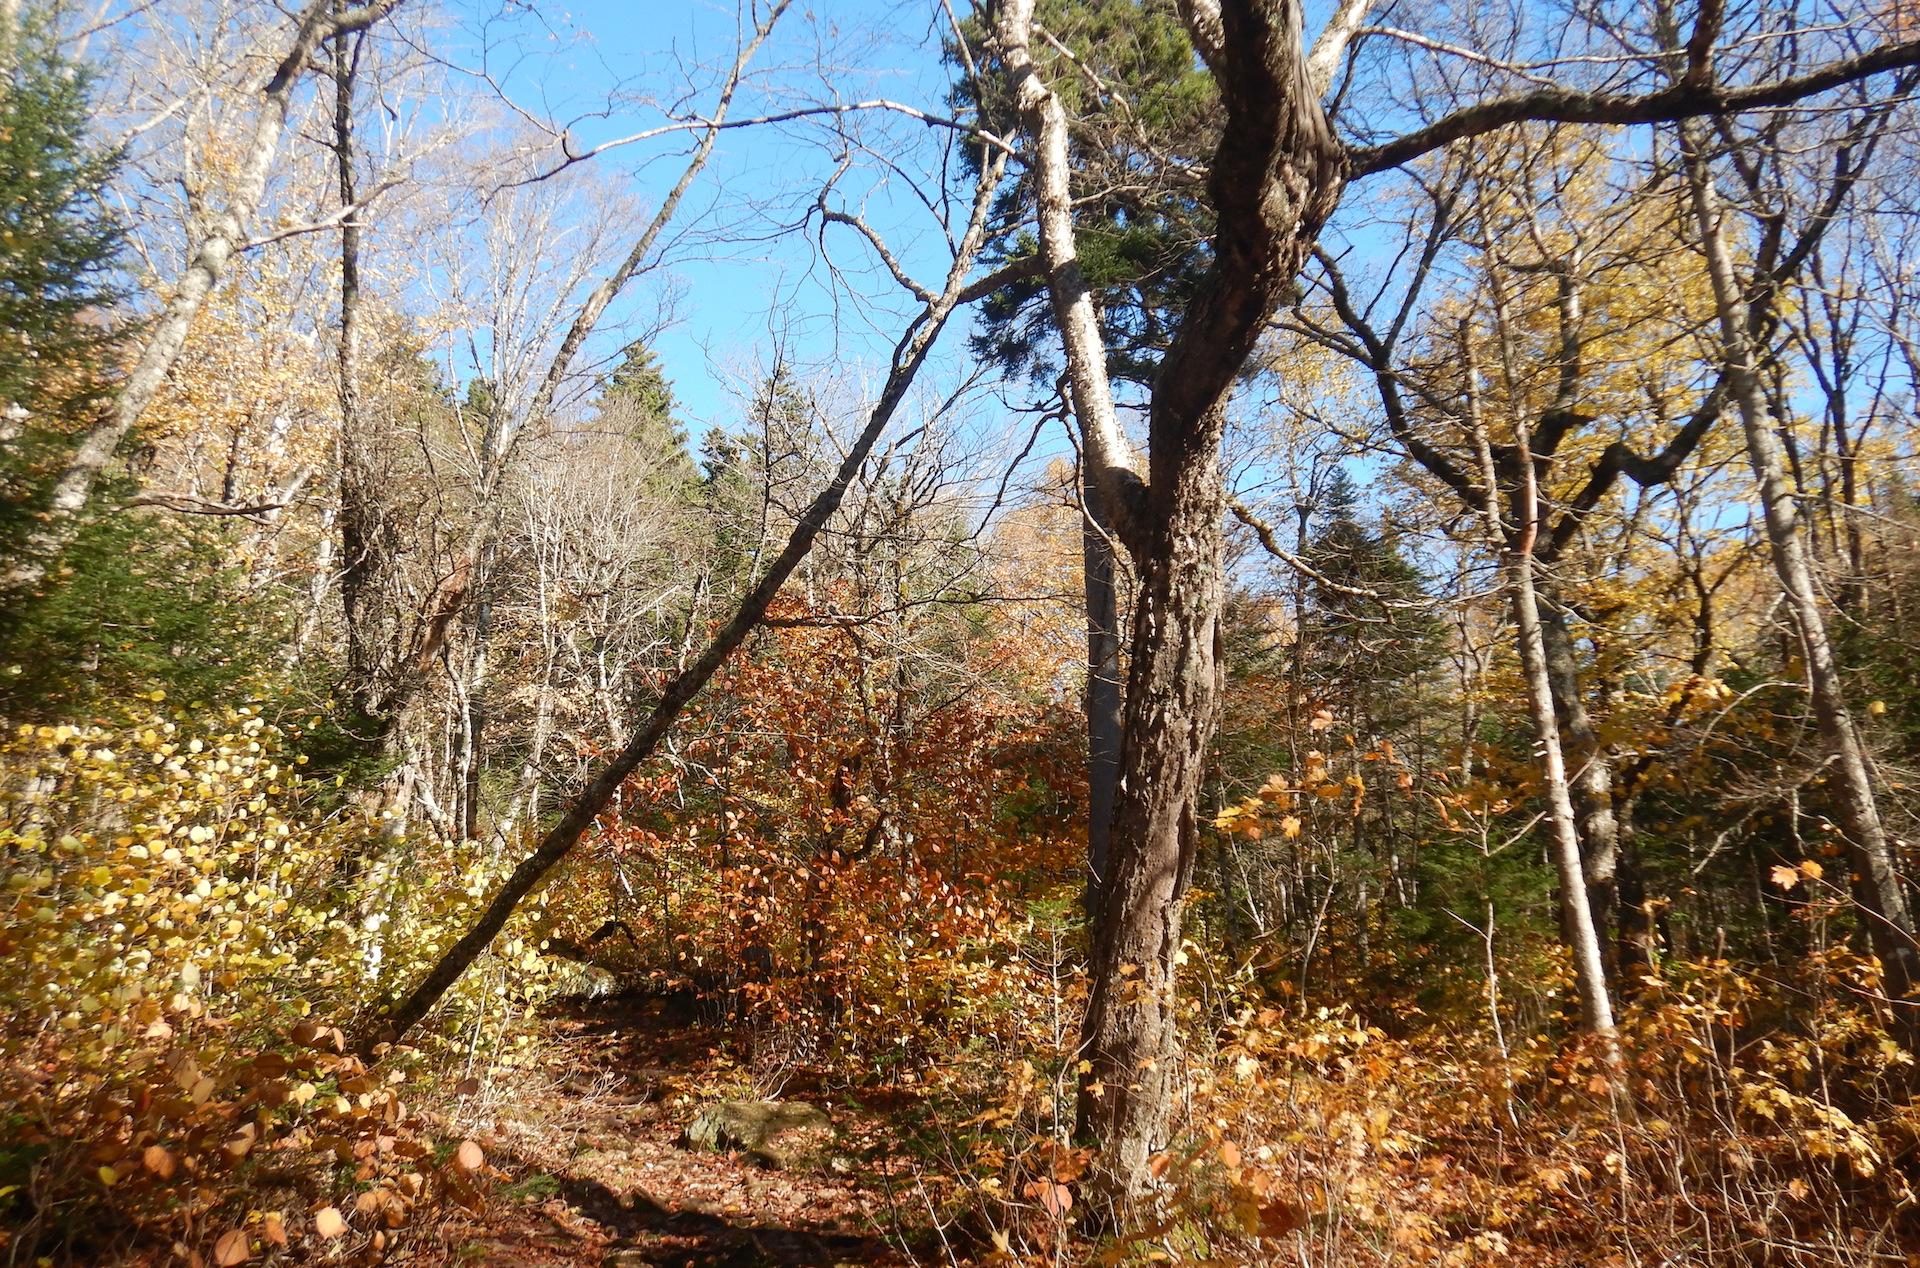 Landscape view of rocky trail through a forest. The trail starts at bottom center and disappears at left of center. The canopy is mostly bare of leaves. The leaves that remain are mostly yellow. A larger tree bisects the image from top to bottom.